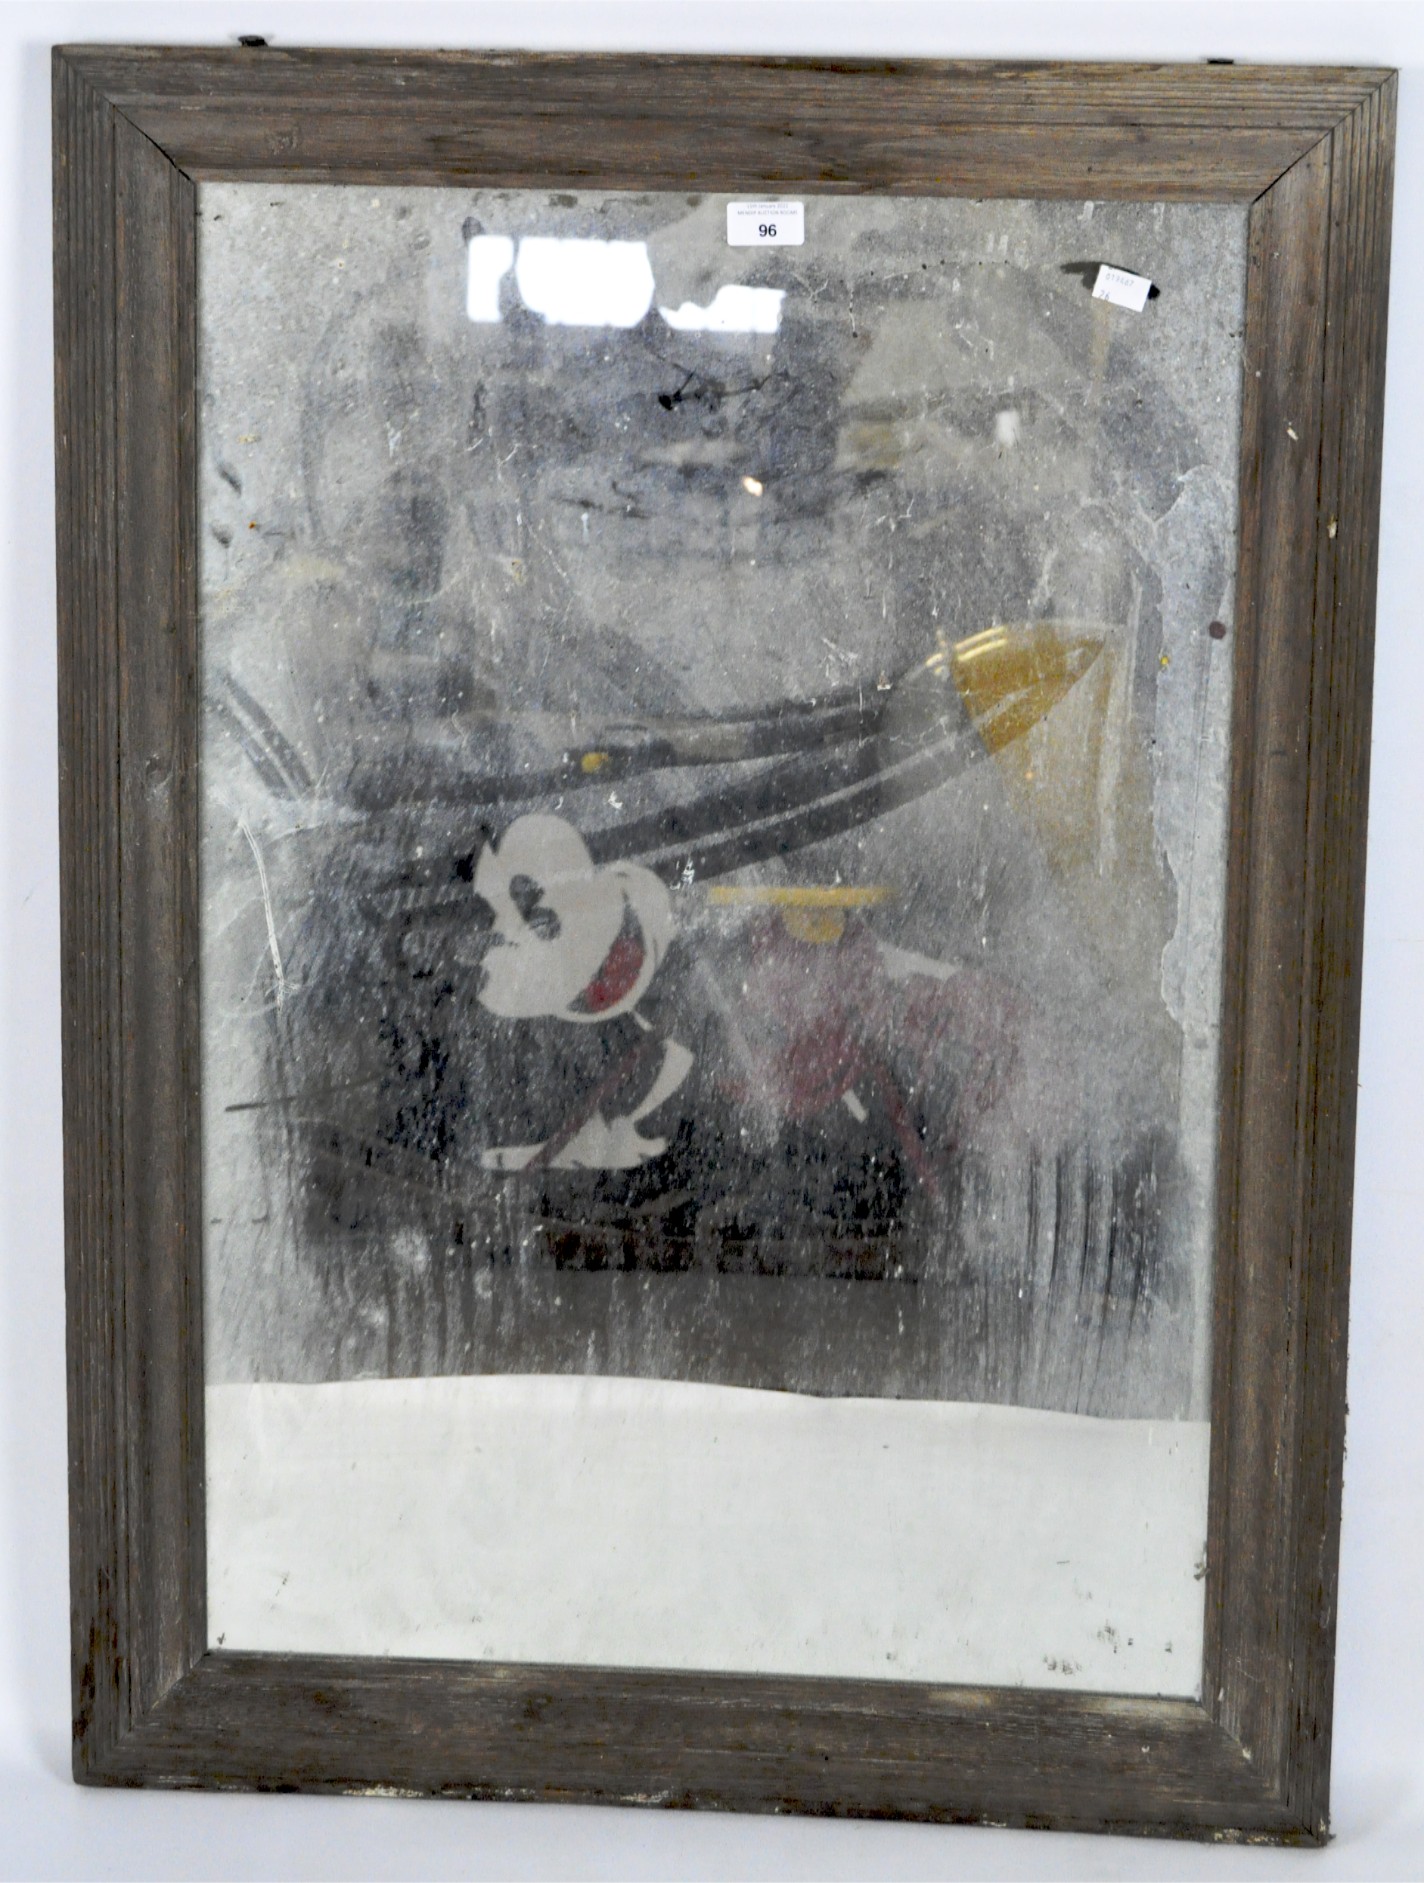 A vintage rectangular wall mirror with profiled wood frame, 93cm x 67.